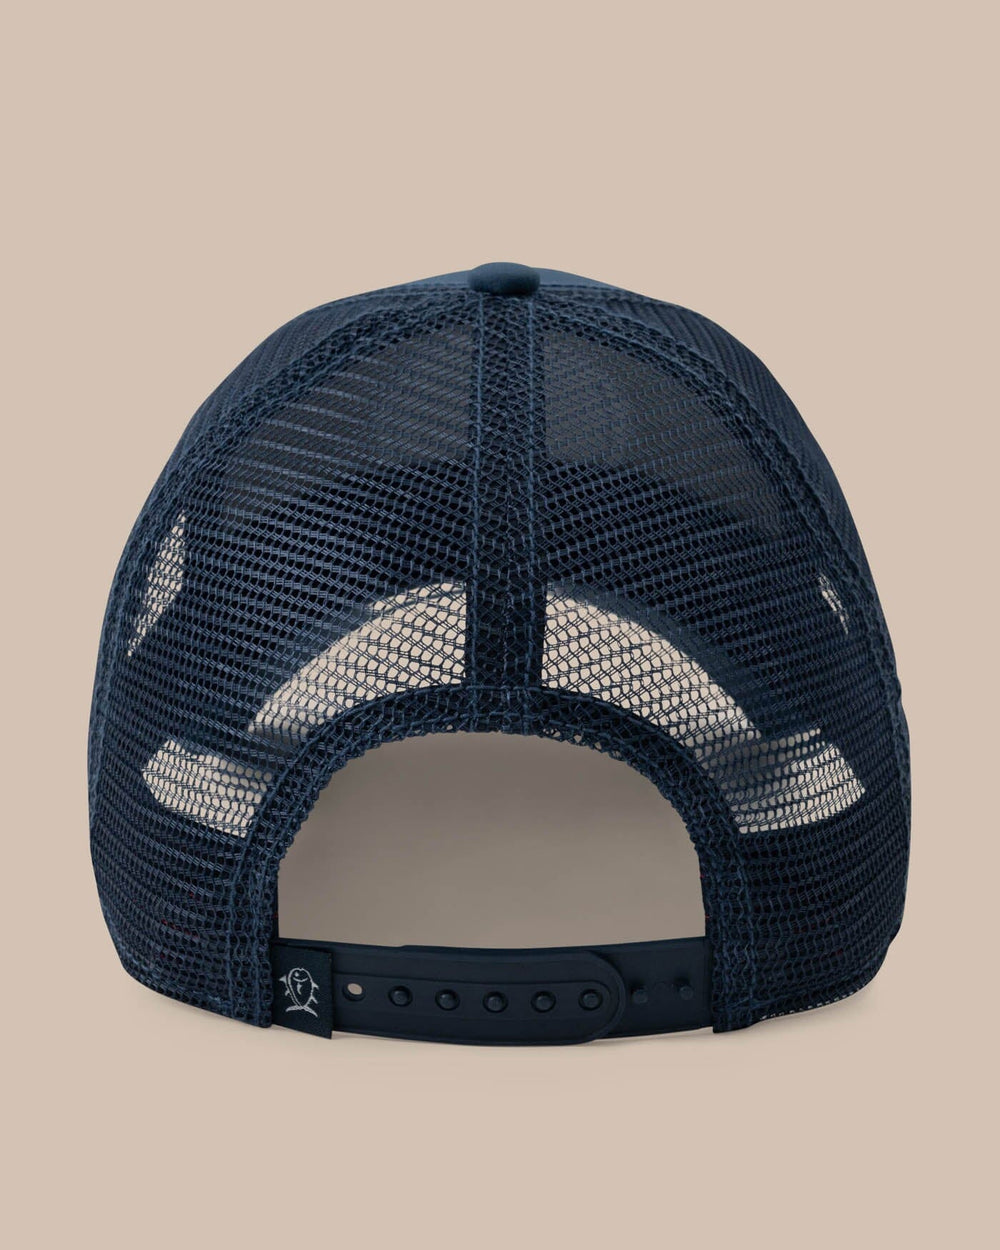 The back view of the Men's Georgia Patch Performance Trucker Hat by Southern Tide - Seven Seas Blue